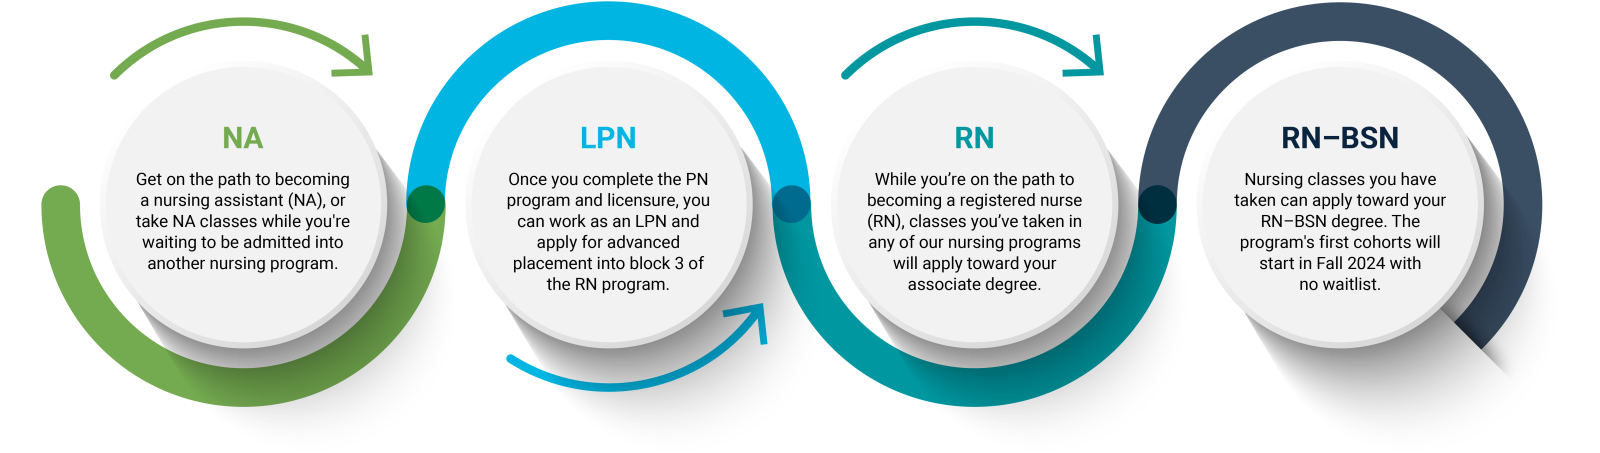 A MaricopaNursing infographic with four circles and arrows pointing to each one from the previous; the first circle says, “NA: Get on the path to becoming a nursing assistant (NA), or take NA classes while you're waiting to be admitted into another nursing program.” The second circle says, “LPN: Once you complete the PN program and licensure, you can work as an LPN and apply for advanced placement into block 3 of the RN program.” The third circle says, “RN: While you’re on the path to becoming a registered 